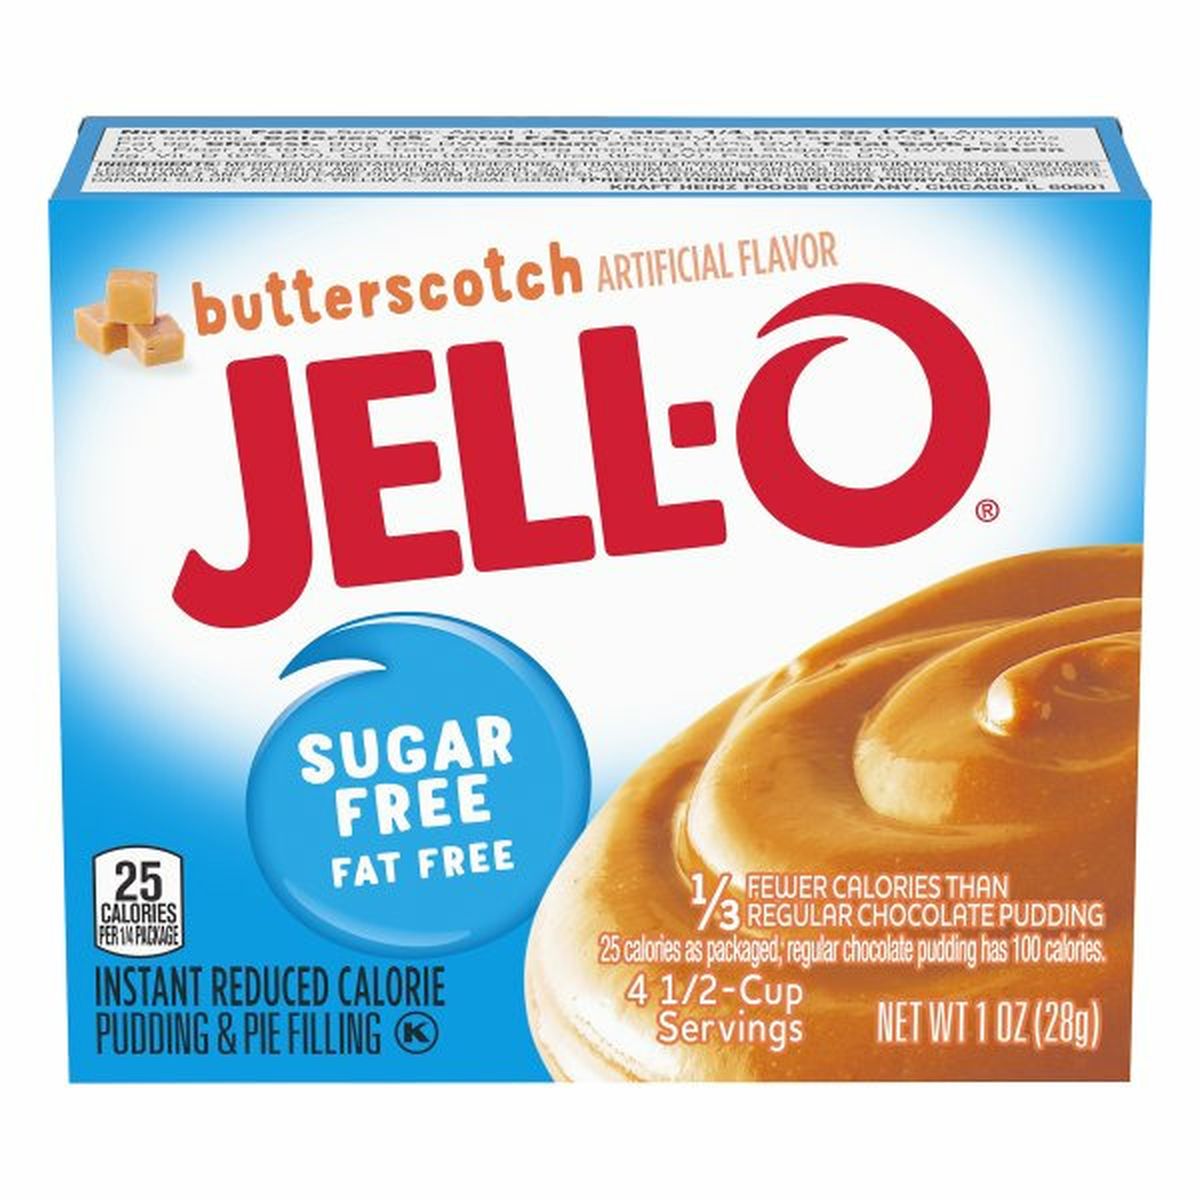 Calories in Jell-O Pudding & Pie Filling, Sugar Free, Fat Free, Butterscotch